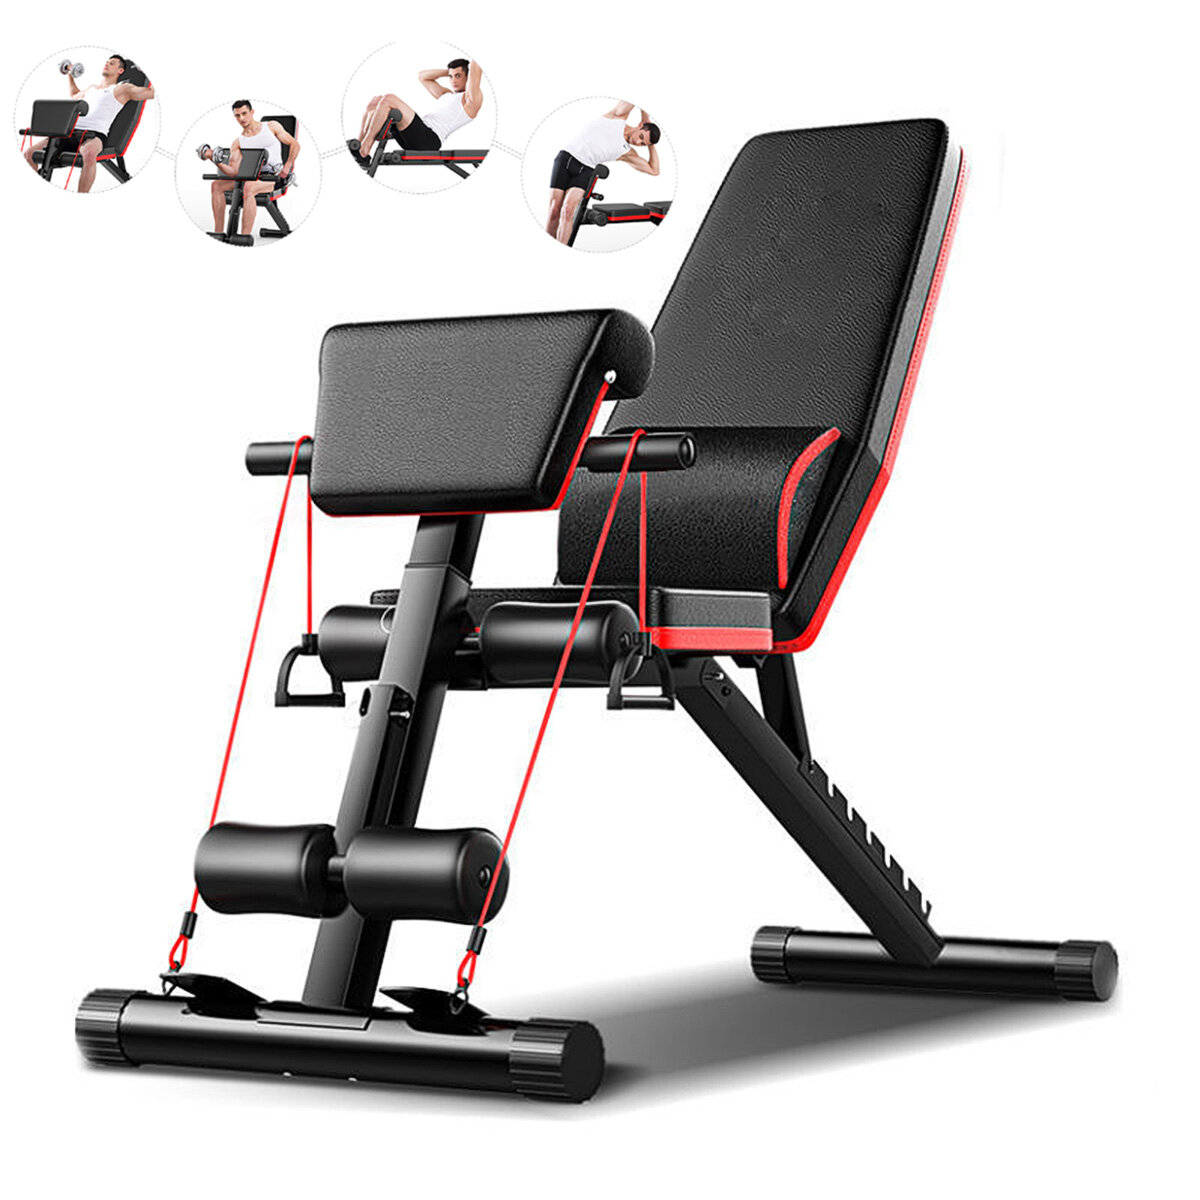 best price,in,foldable,exercise,bench,eu,coupon,price,discount